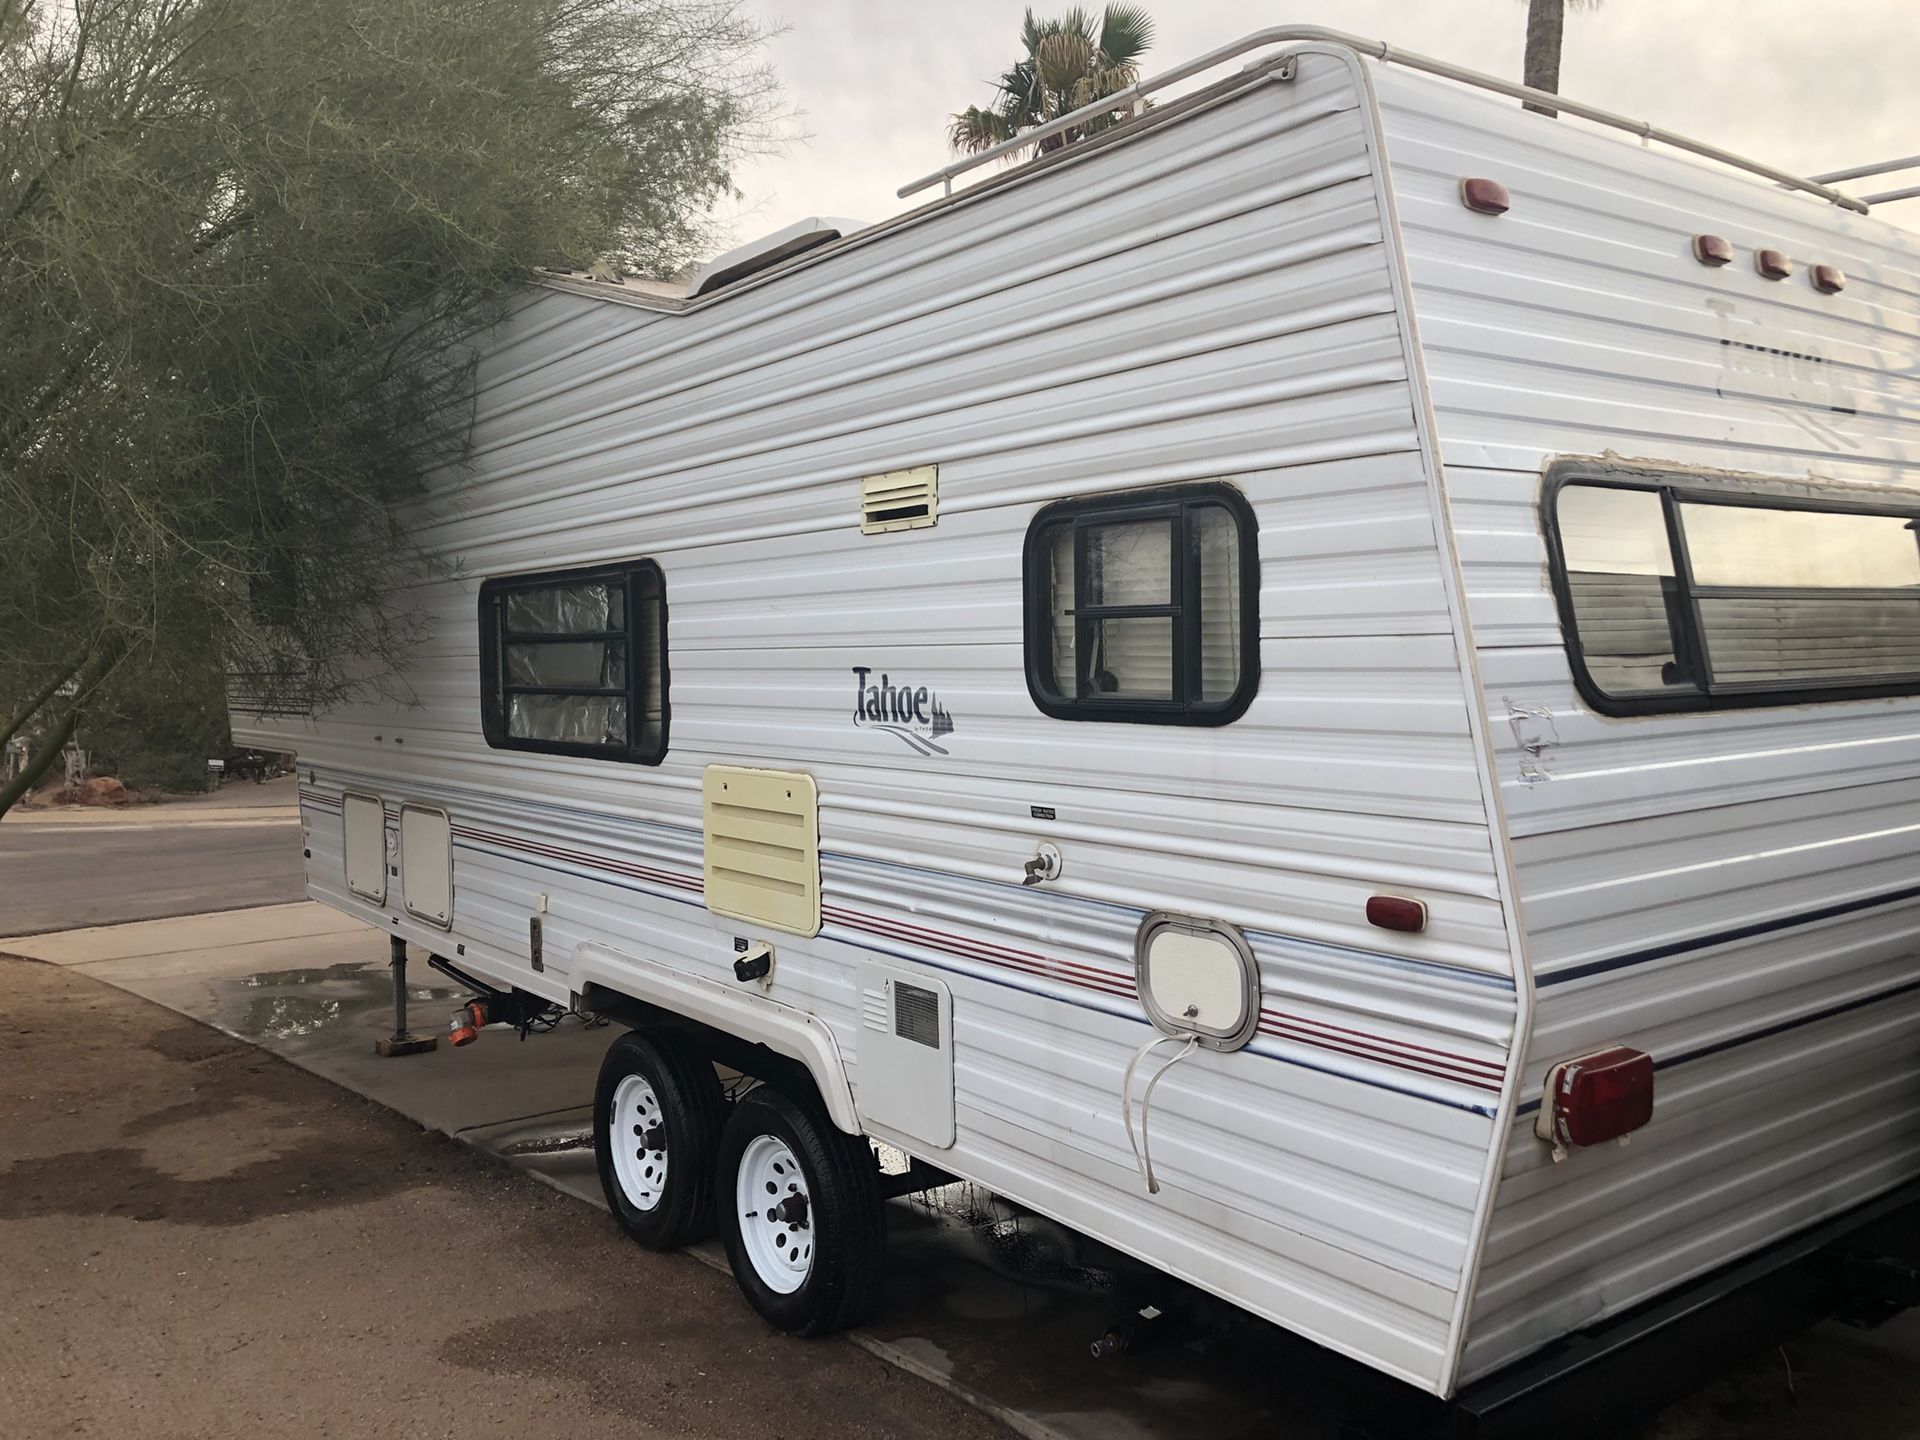 1997 Tahoe by Thor 5th wheel 26 feet, good condition, $2900